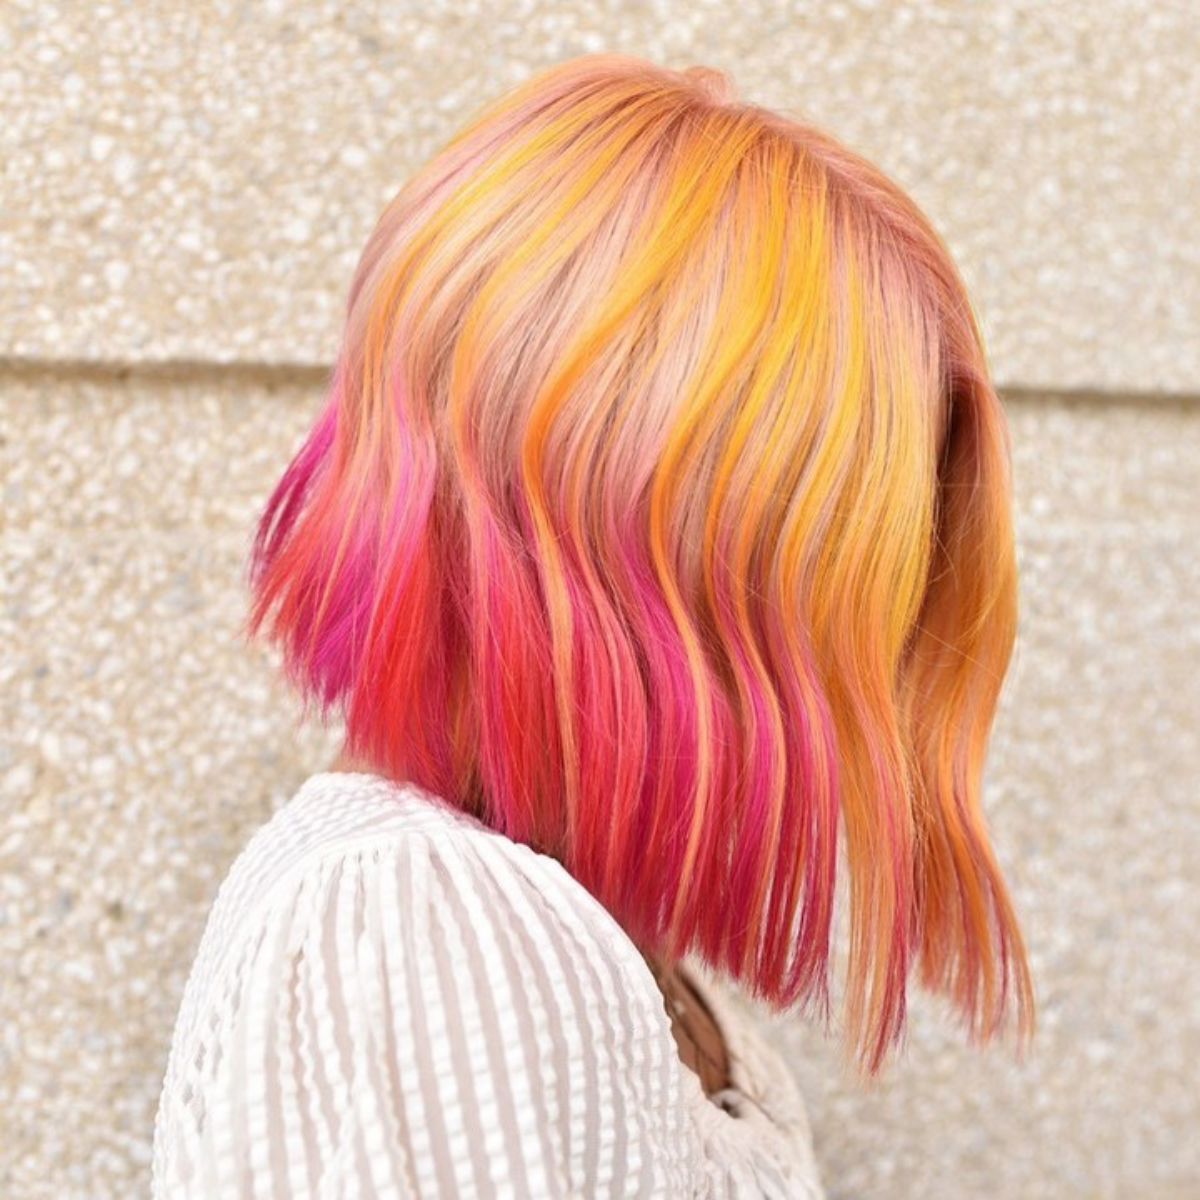 orange highlights and pink ombre